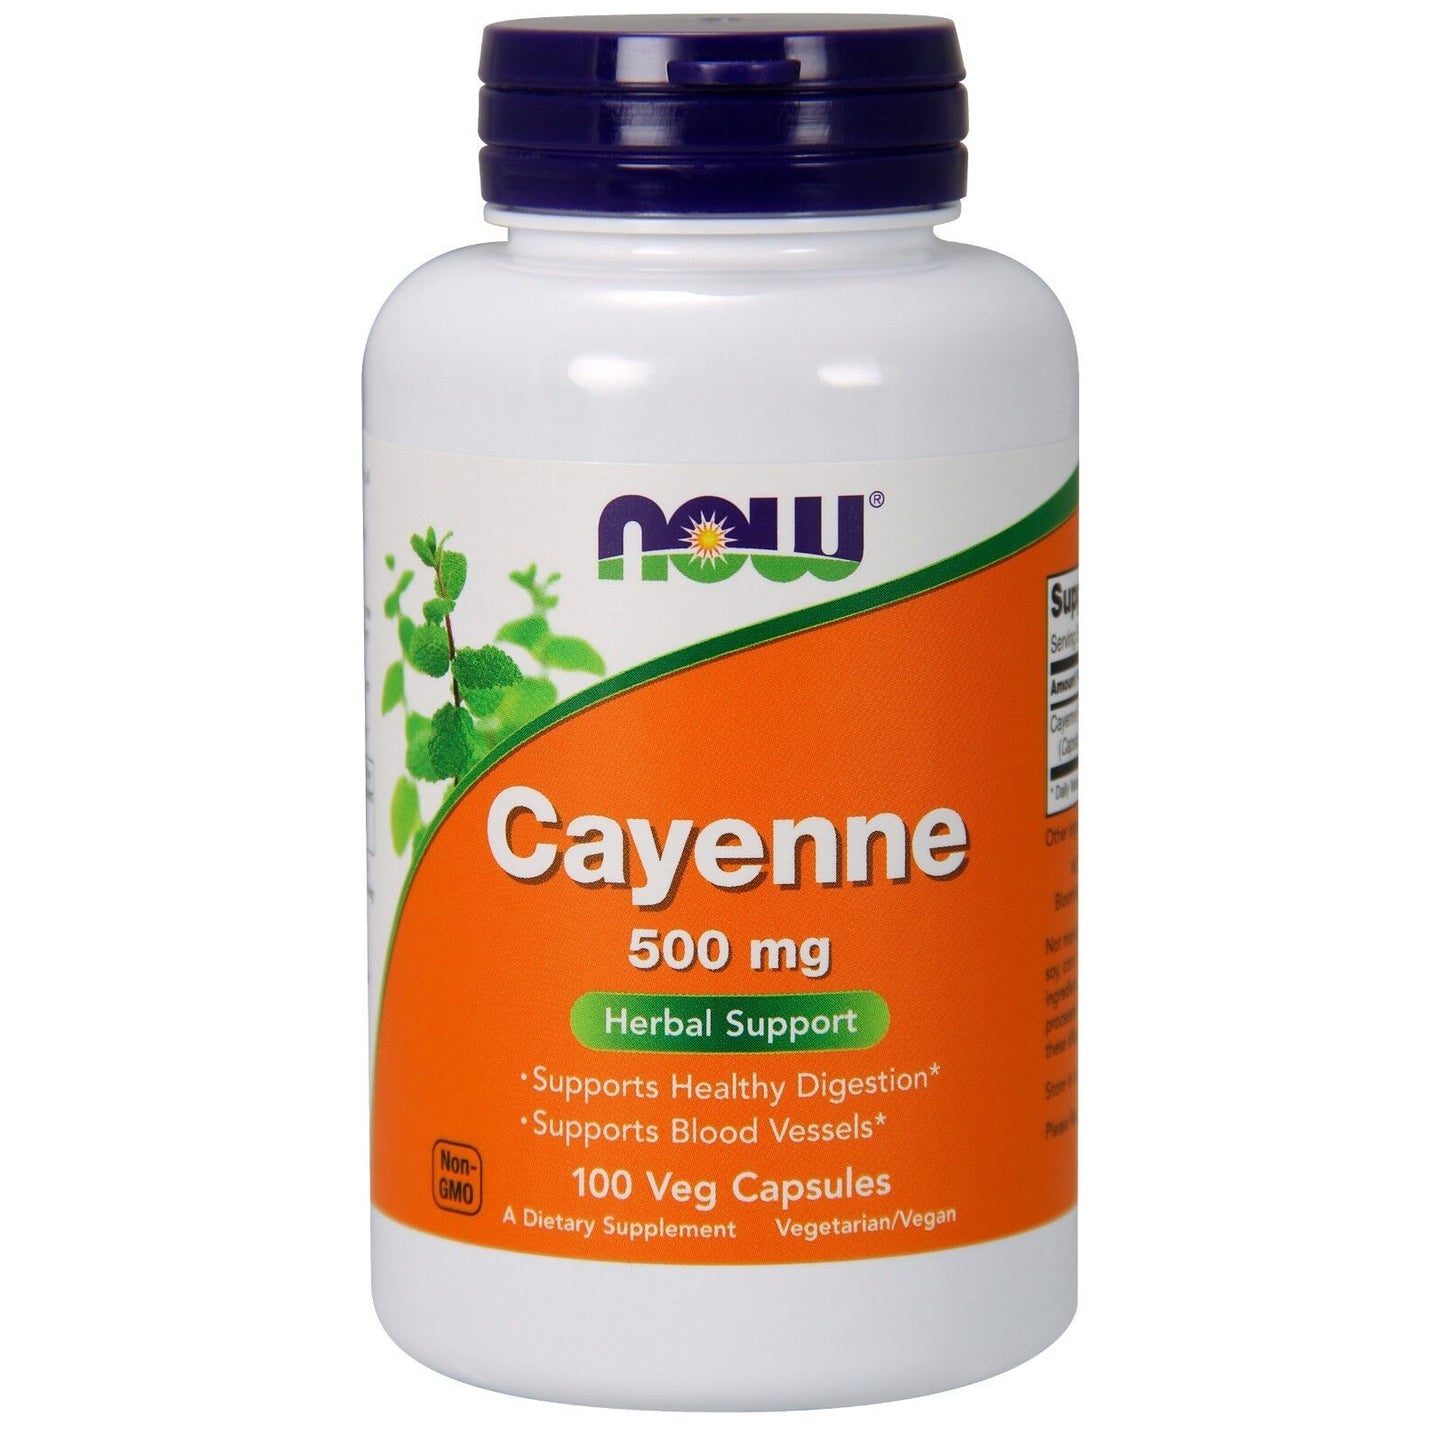 NOW Foods Cayenne, 500 mg, 100 Veg Capsules